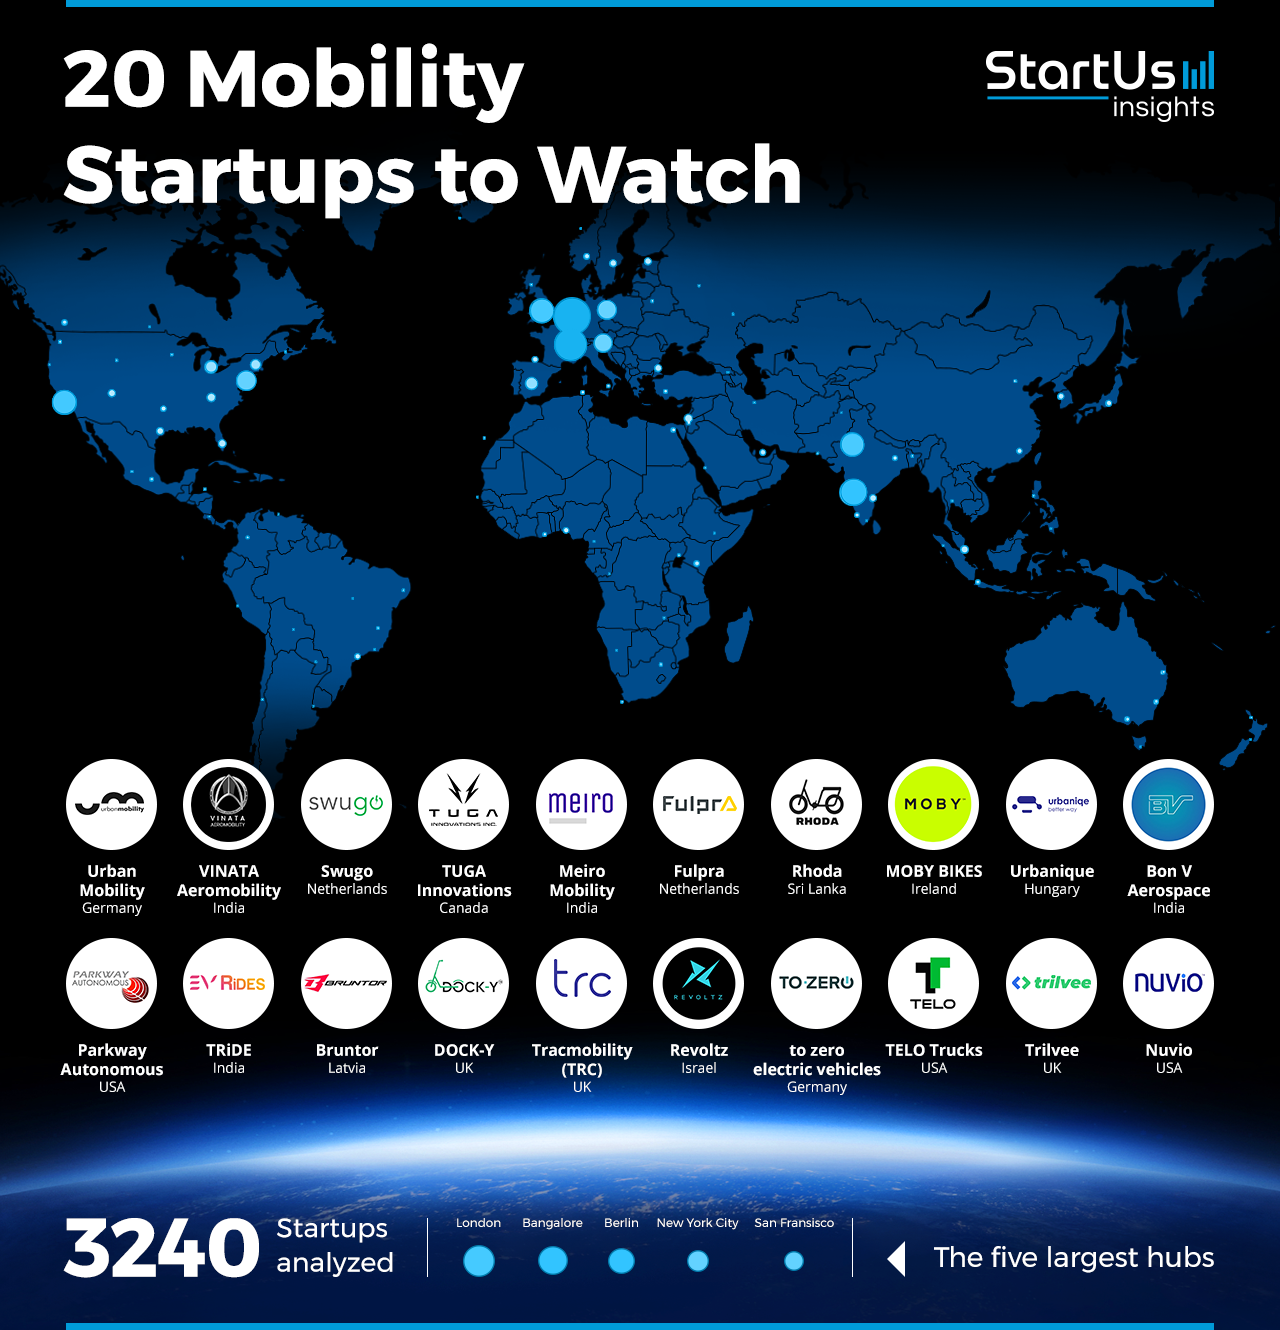 Mobility-Startups-to-Watch-Heat-Map-StartUs-Insights